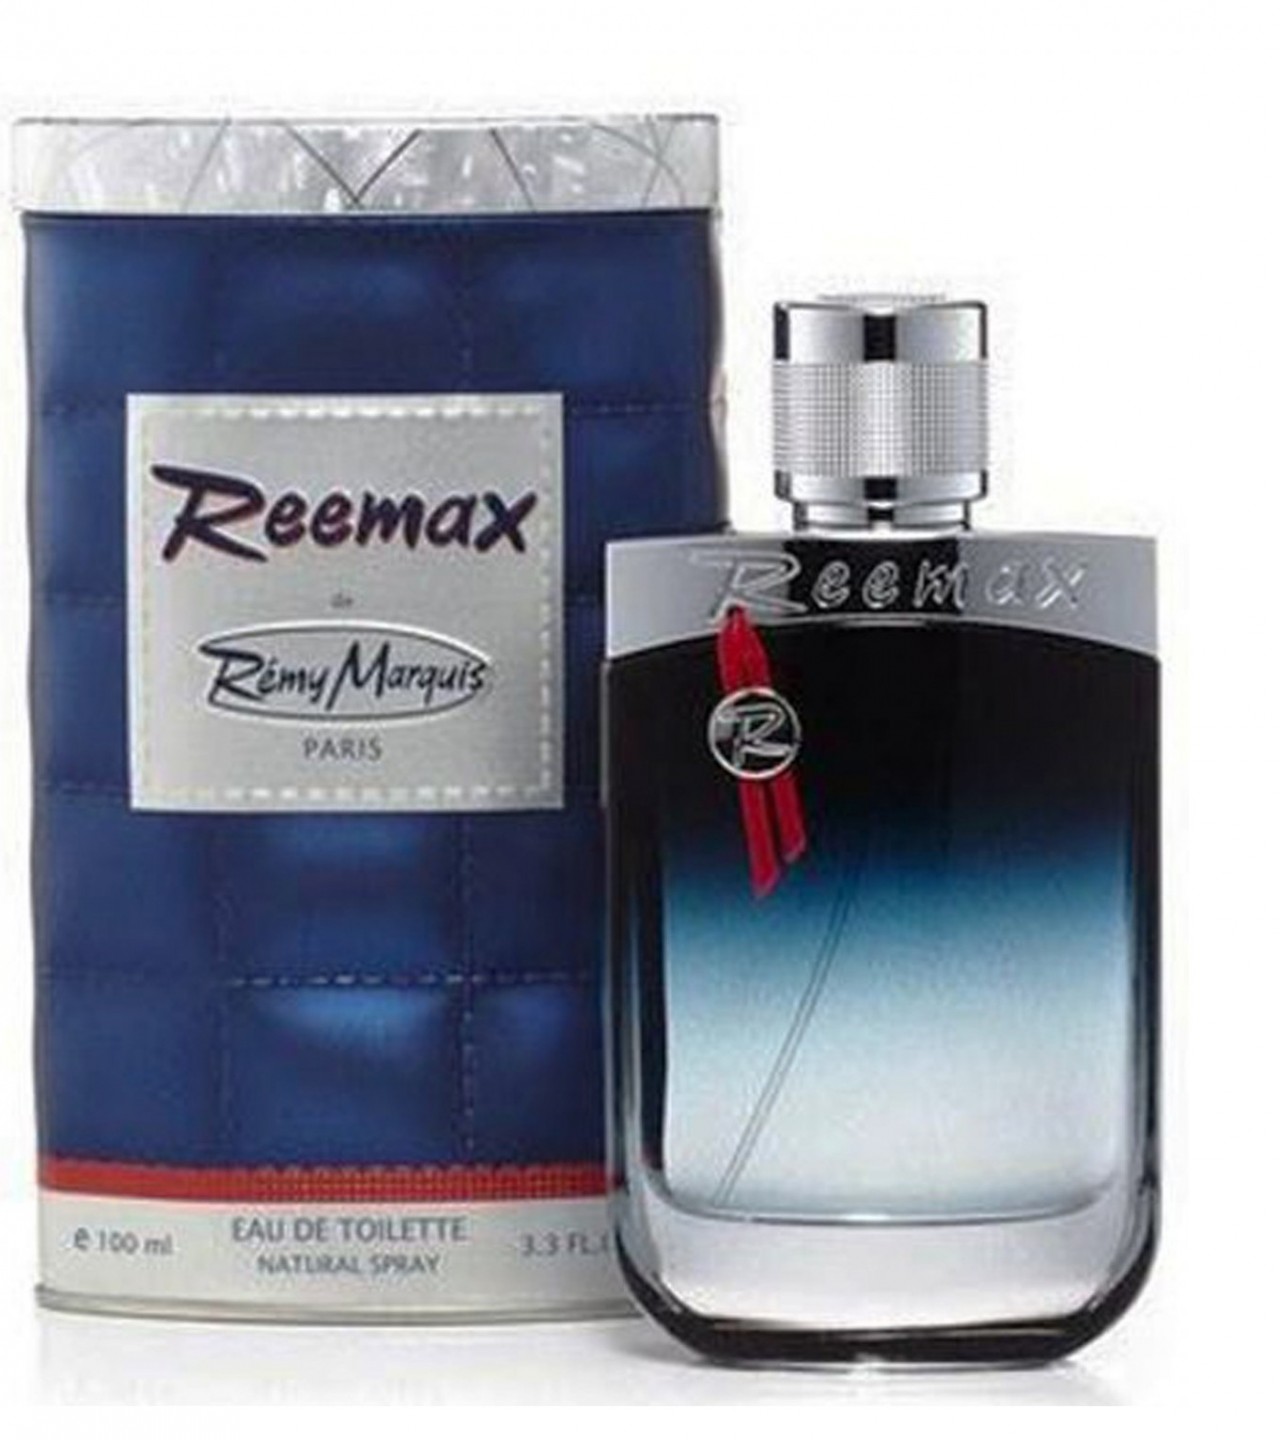 Remy Marquis Reemax Perfume For Men - EDT - 100 ml